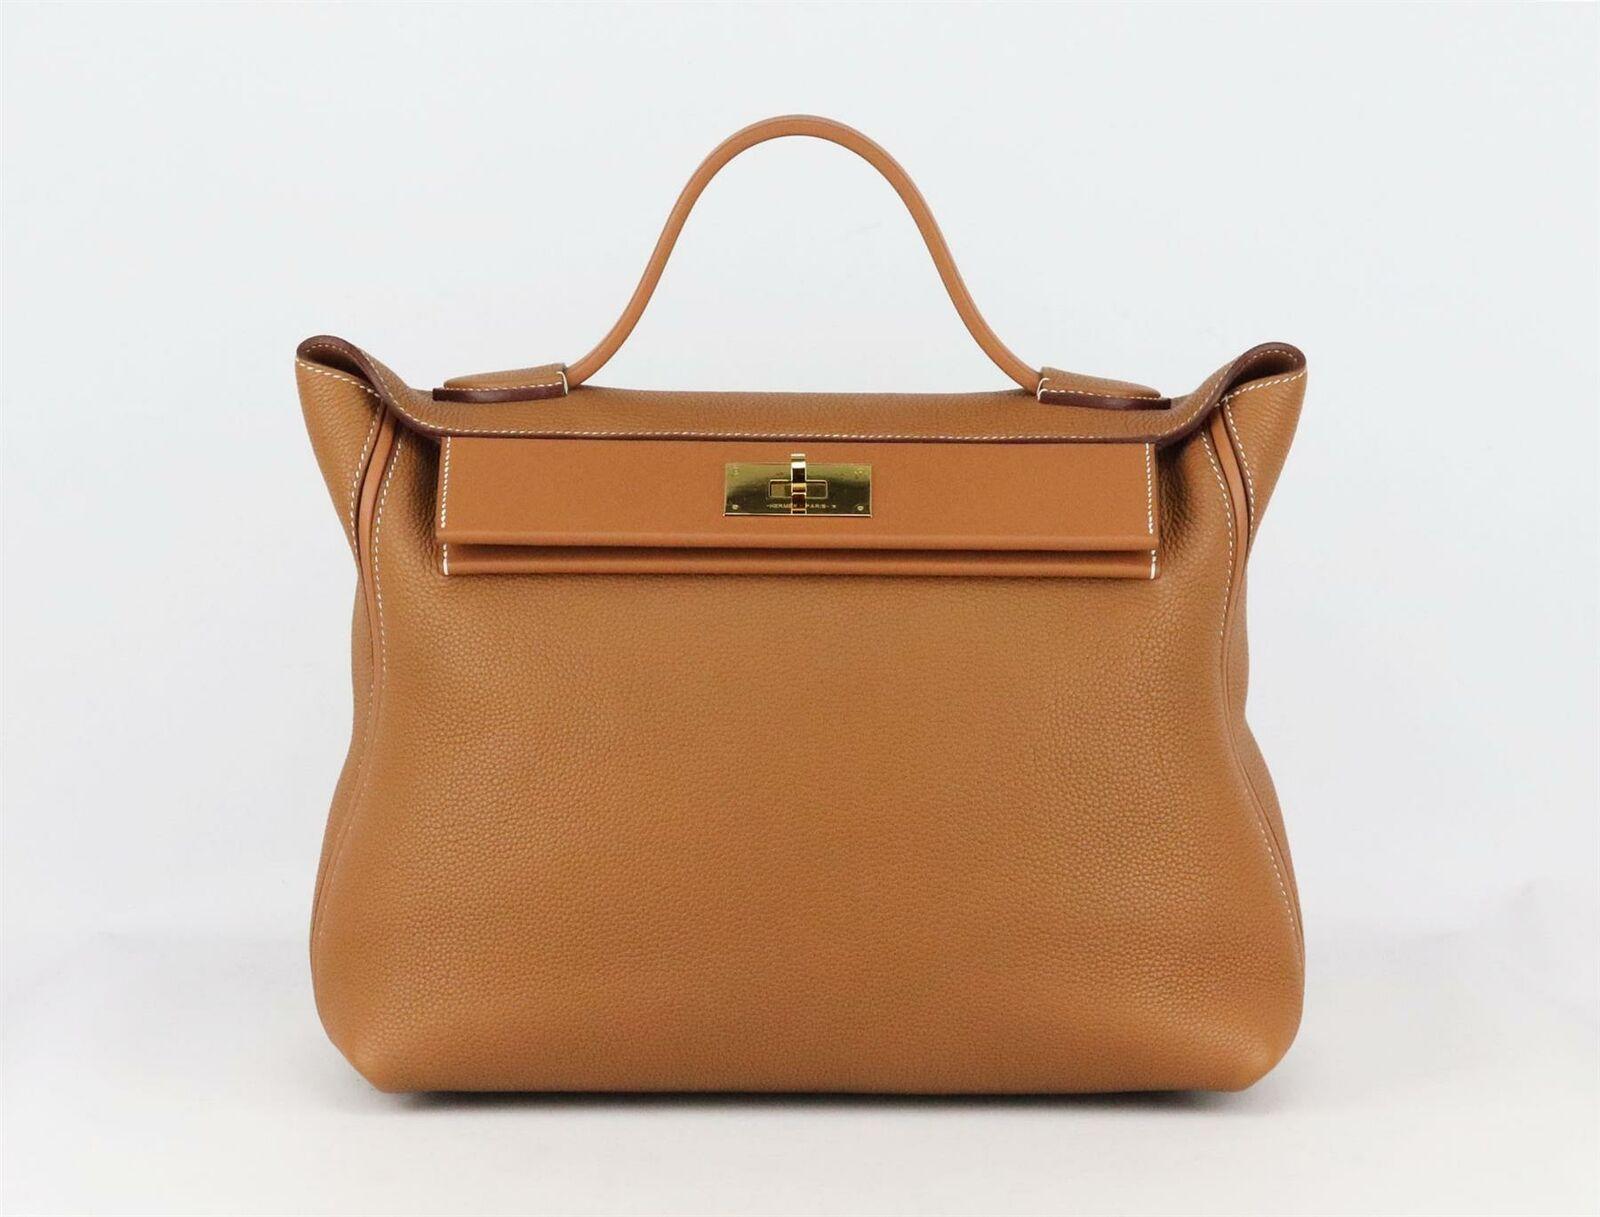 Made in France, this beautiful 2019 Hermès ‘24/24’ 35cm handbag has been made from soft tan Taurillon Maurice and Swift leather exterior and Swift leather interior, this piece is decorated with gold hardware on the front and finished with leather